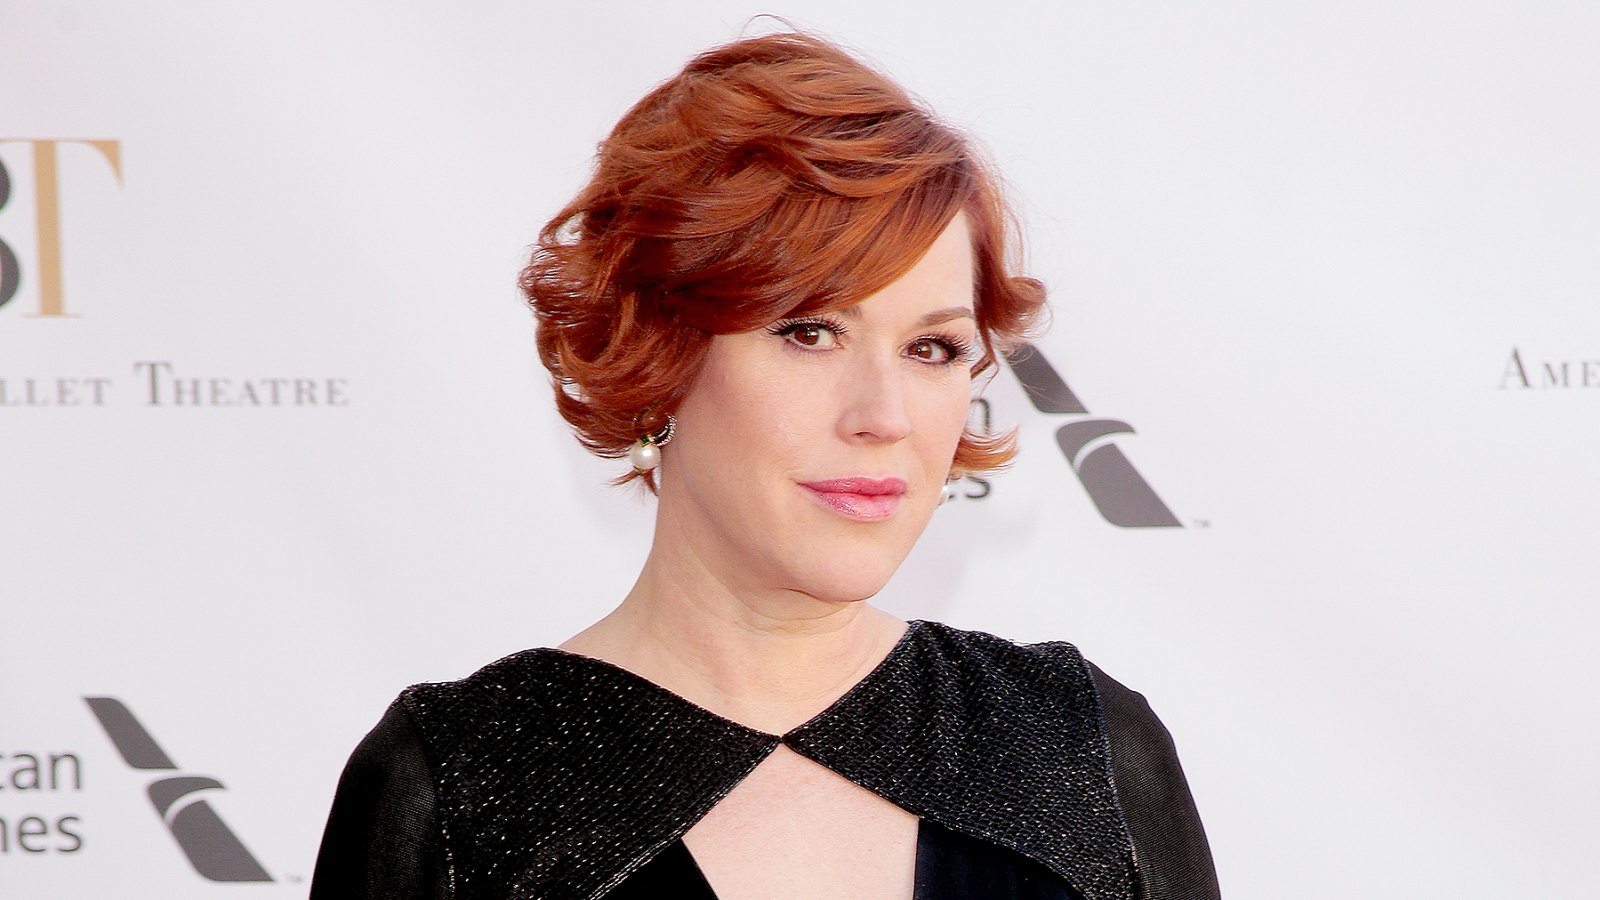 Molly Ringwald attends the 2016 American Ballet Theatre Spring Gala at The Metropolitan Opera House on May 16, 2016 in New York City.